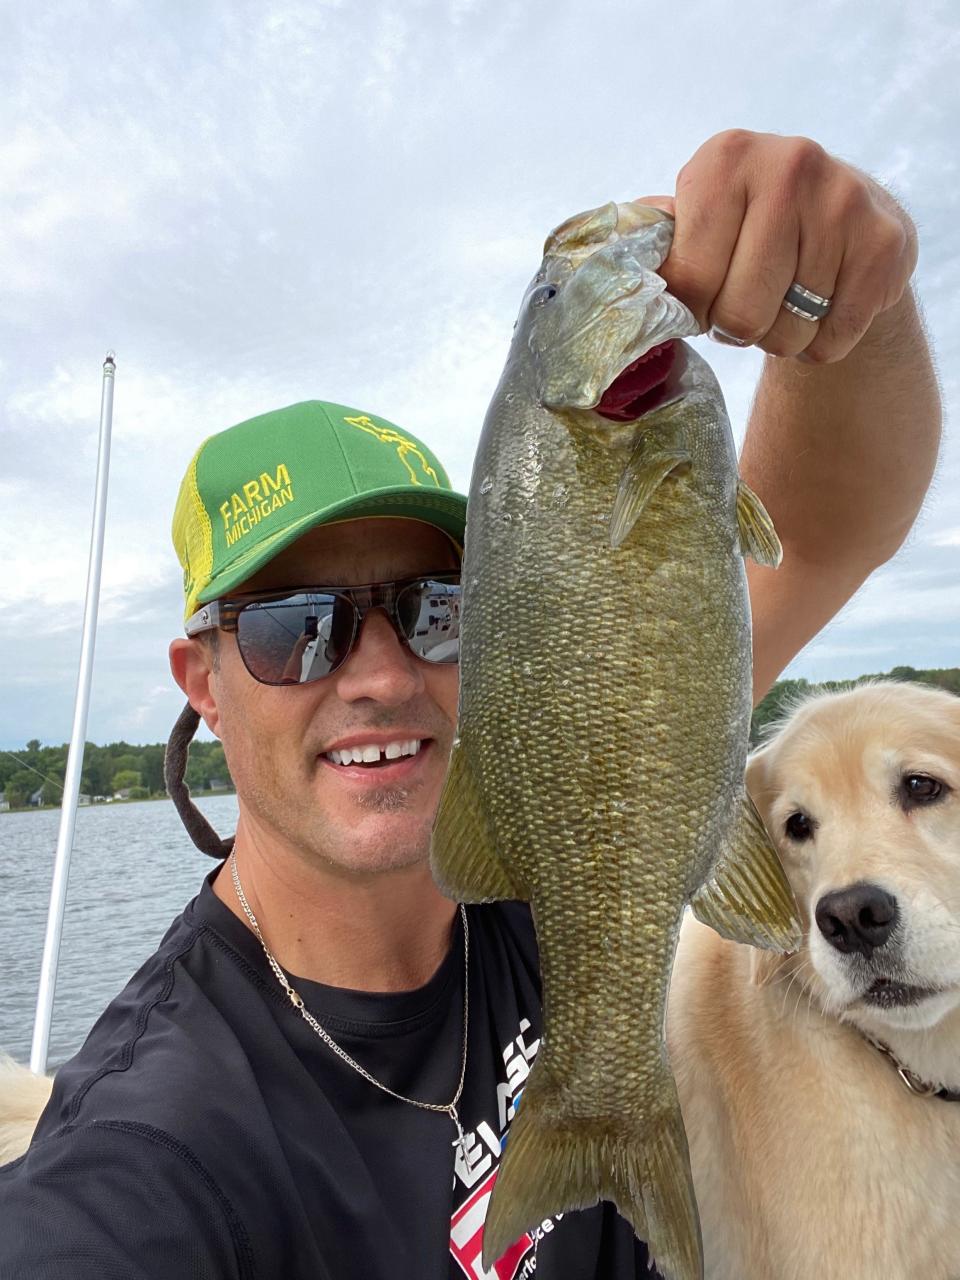 Thad Szott takes a break from selling cars for Szott Ford in Holly to fish on Otsego Lake in Gaylord, Michigan, with his dog Nicki on Saturday, Aug. 22, 2020. He said on April 4, 2022, that he navigates calls, texts, Facebook messenger requests from shoppers who are anxious and eager.